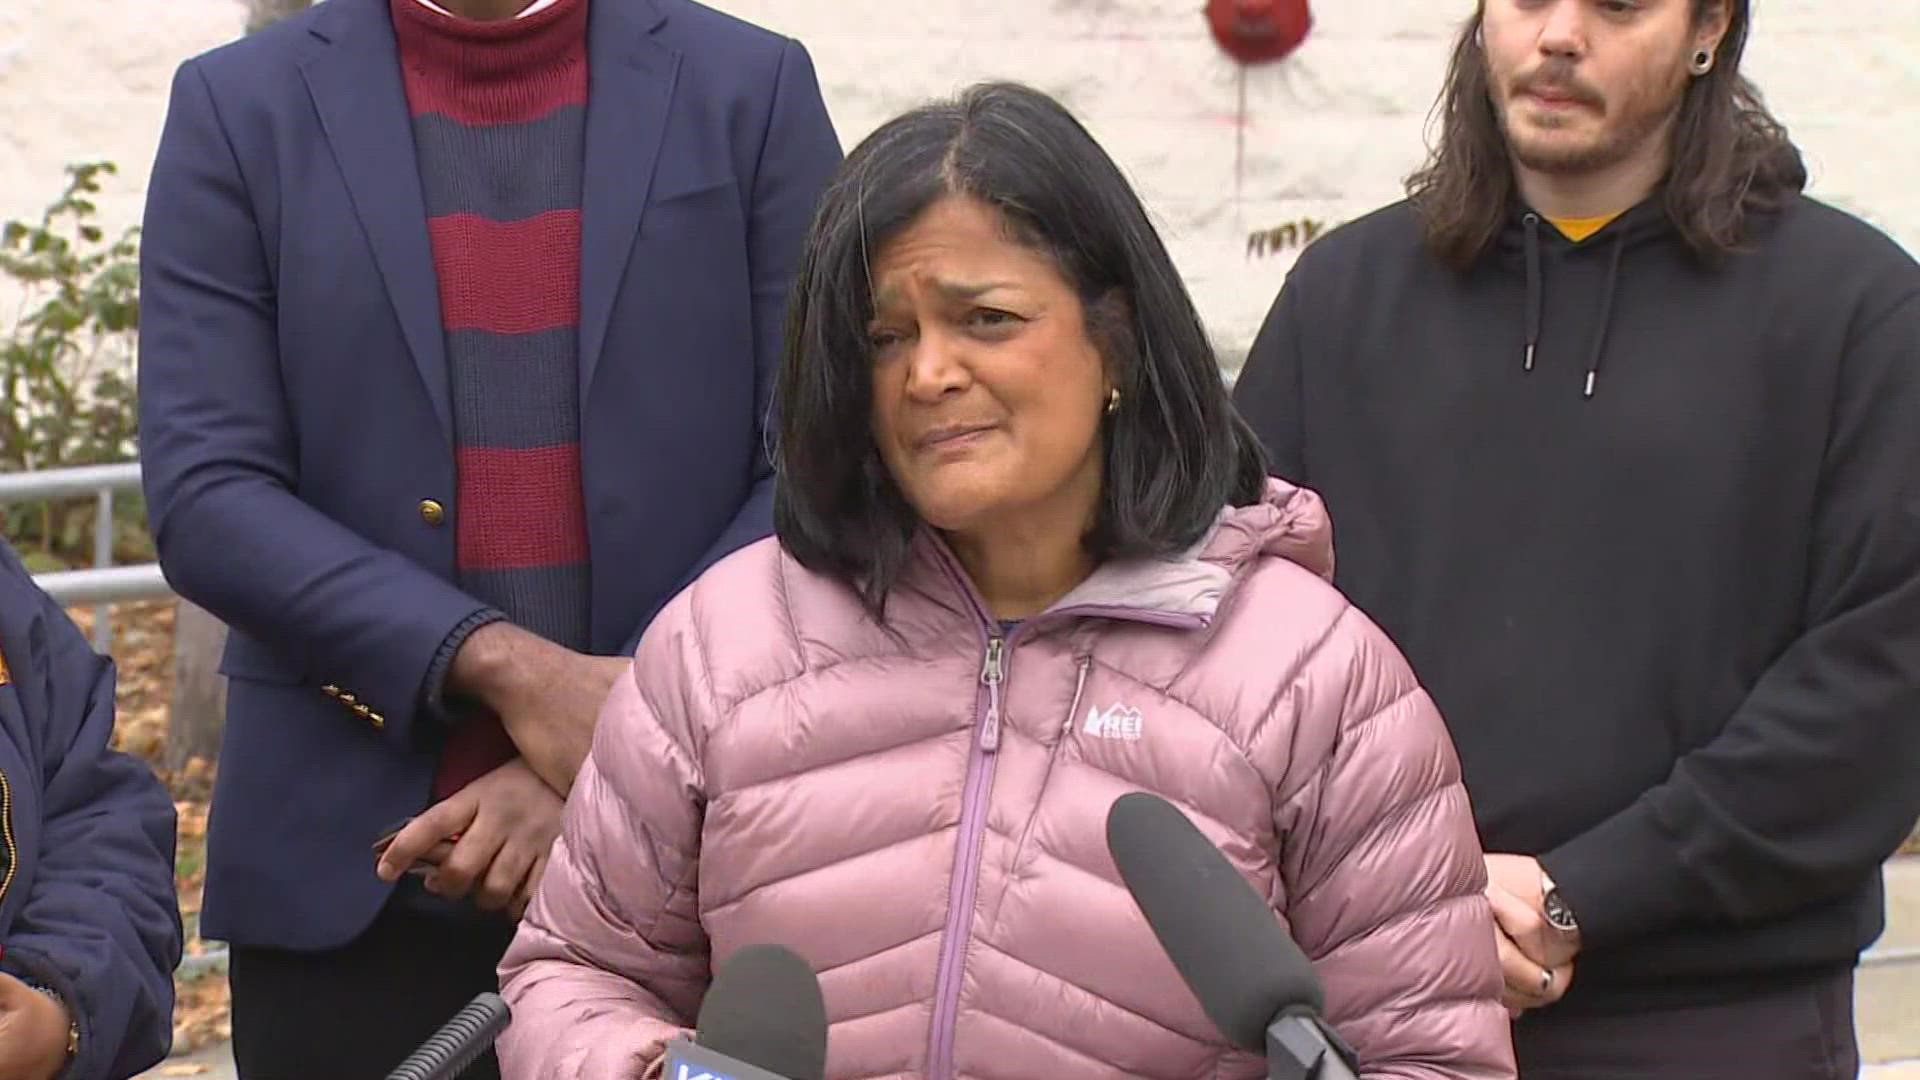 Jayapal said the proposed acquisition would threaten competition and hurt consumers, workers, and small businesses.